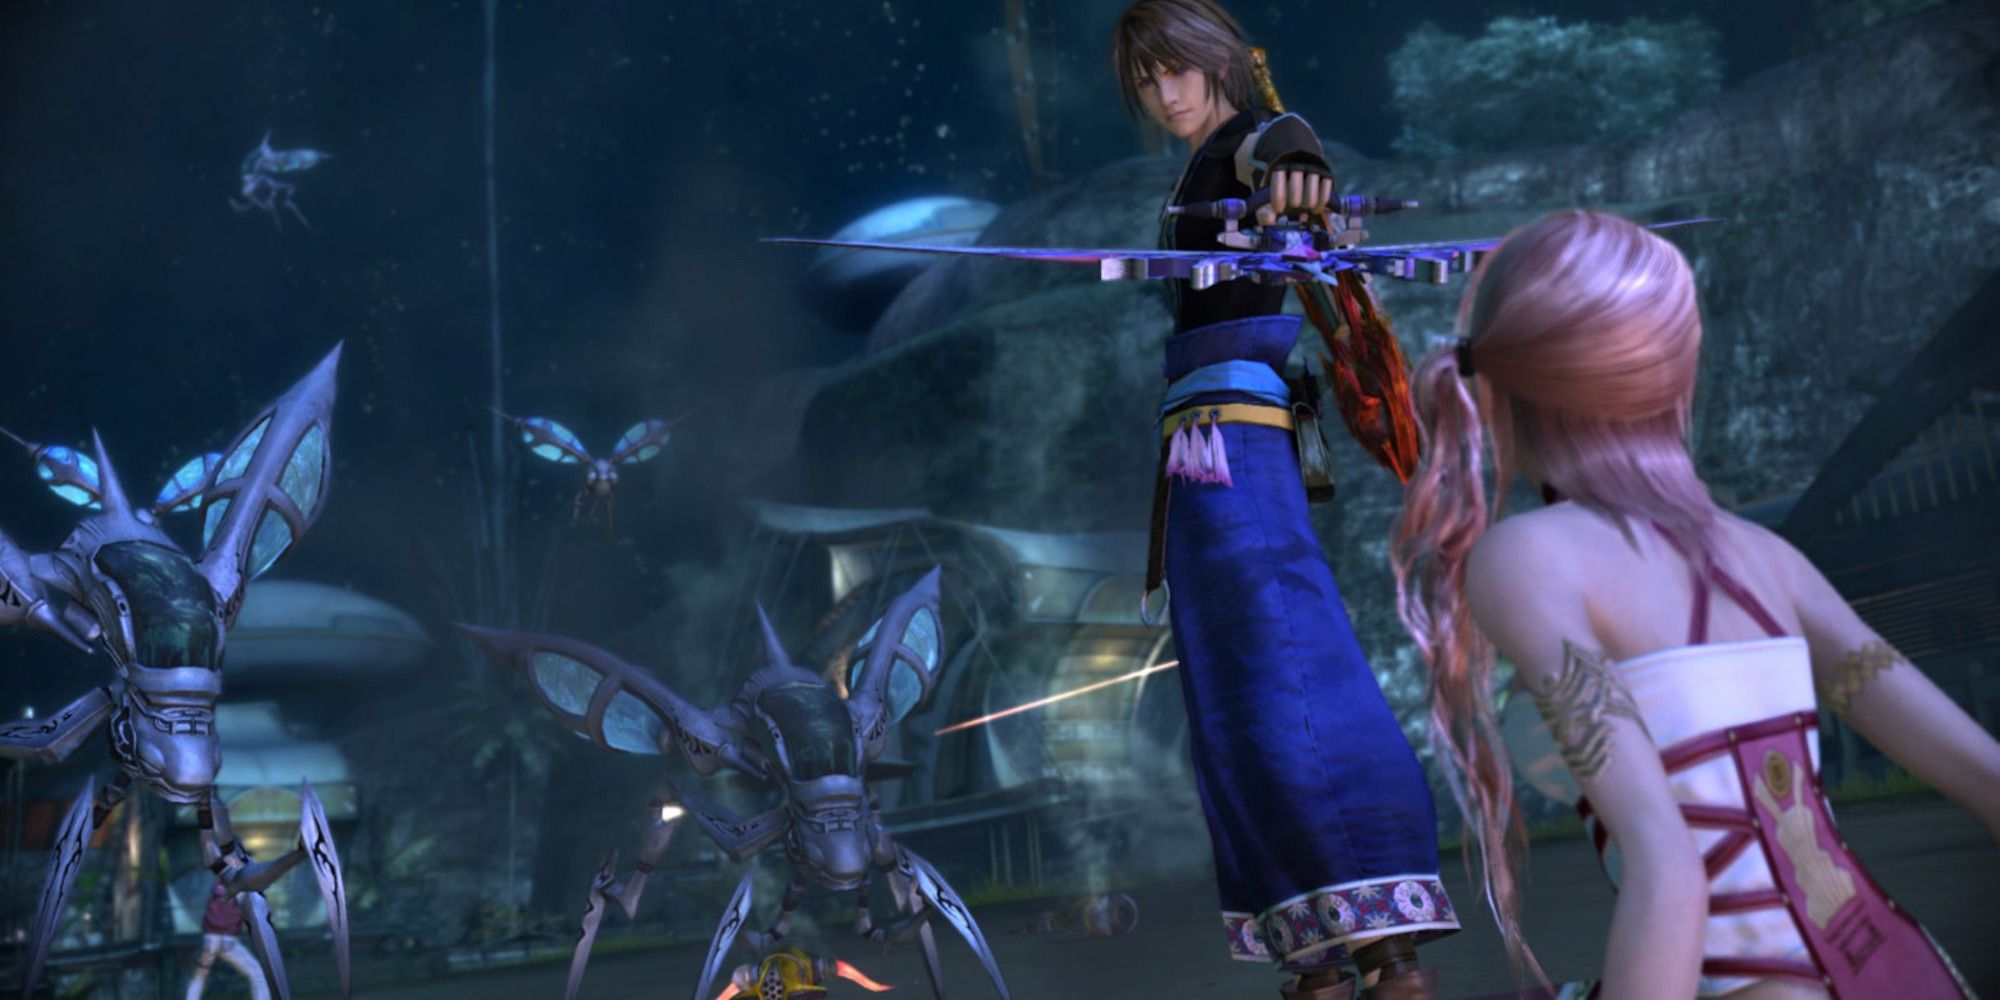 A scene featuring characters from Final Fantasy 13-2